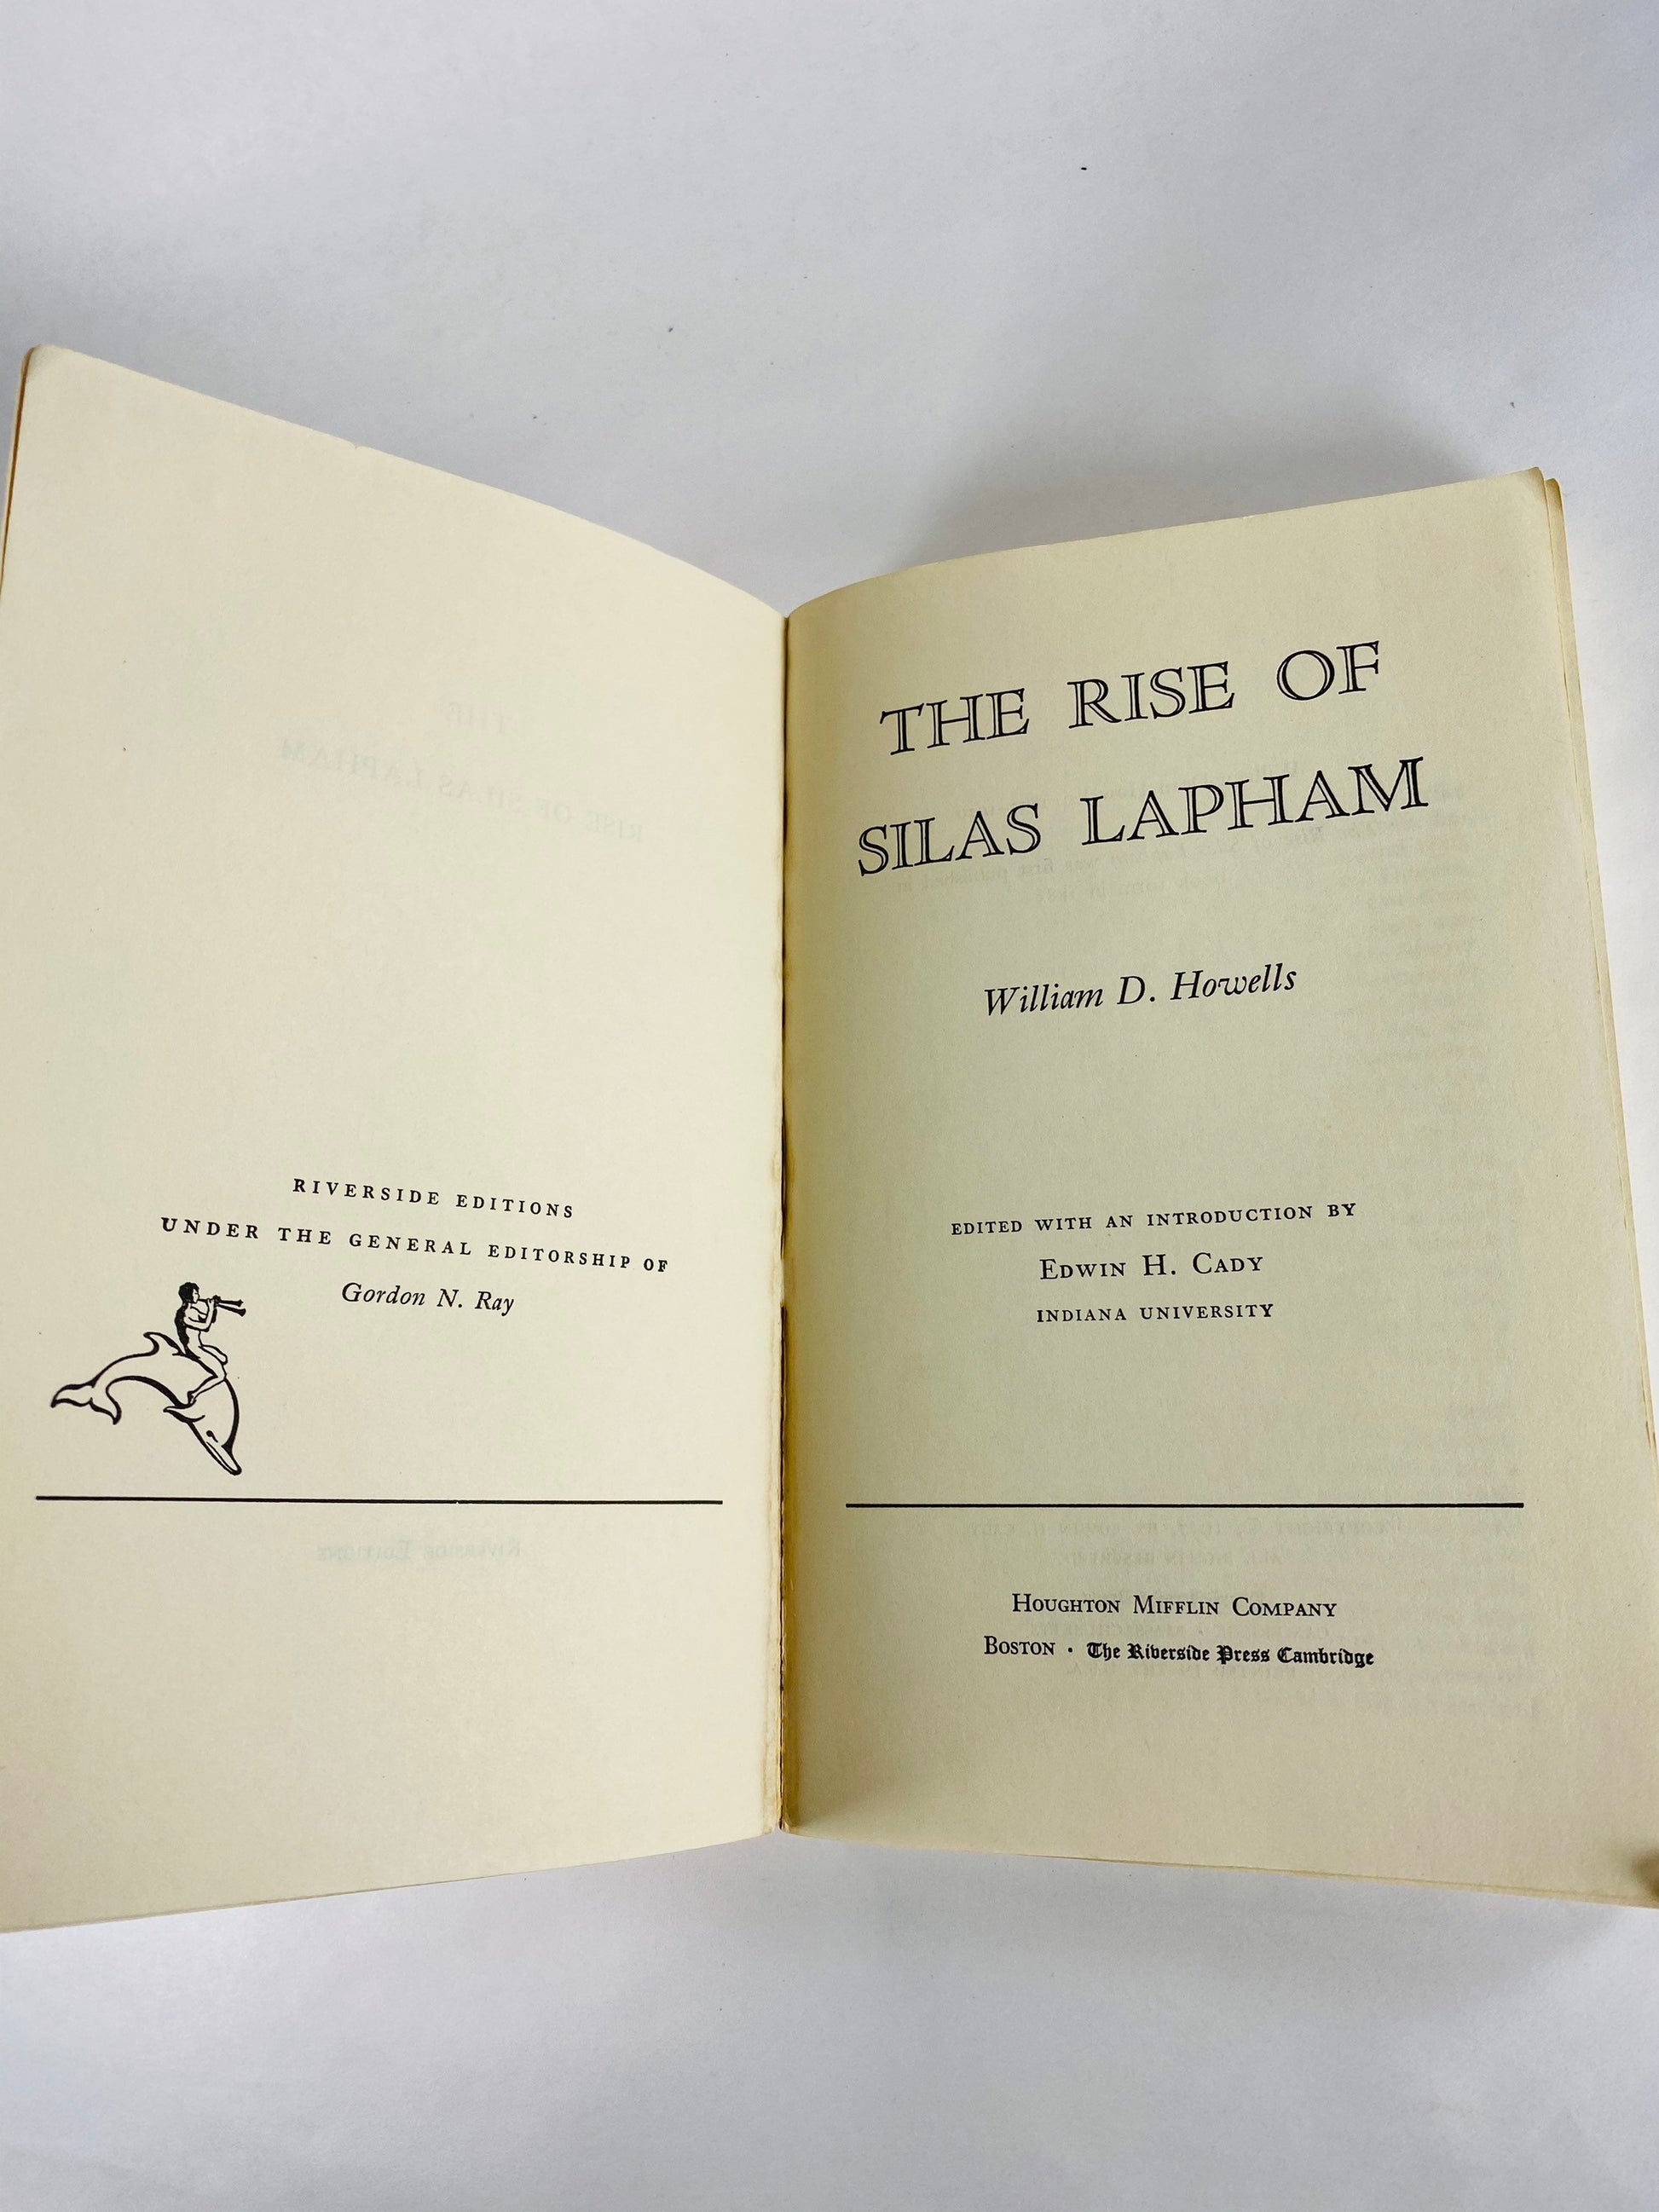 1957 Rise of Silas Lapham by William Howells Vintage Riverside paperback book about a self-made millionaire in Boston during the Gilded Age